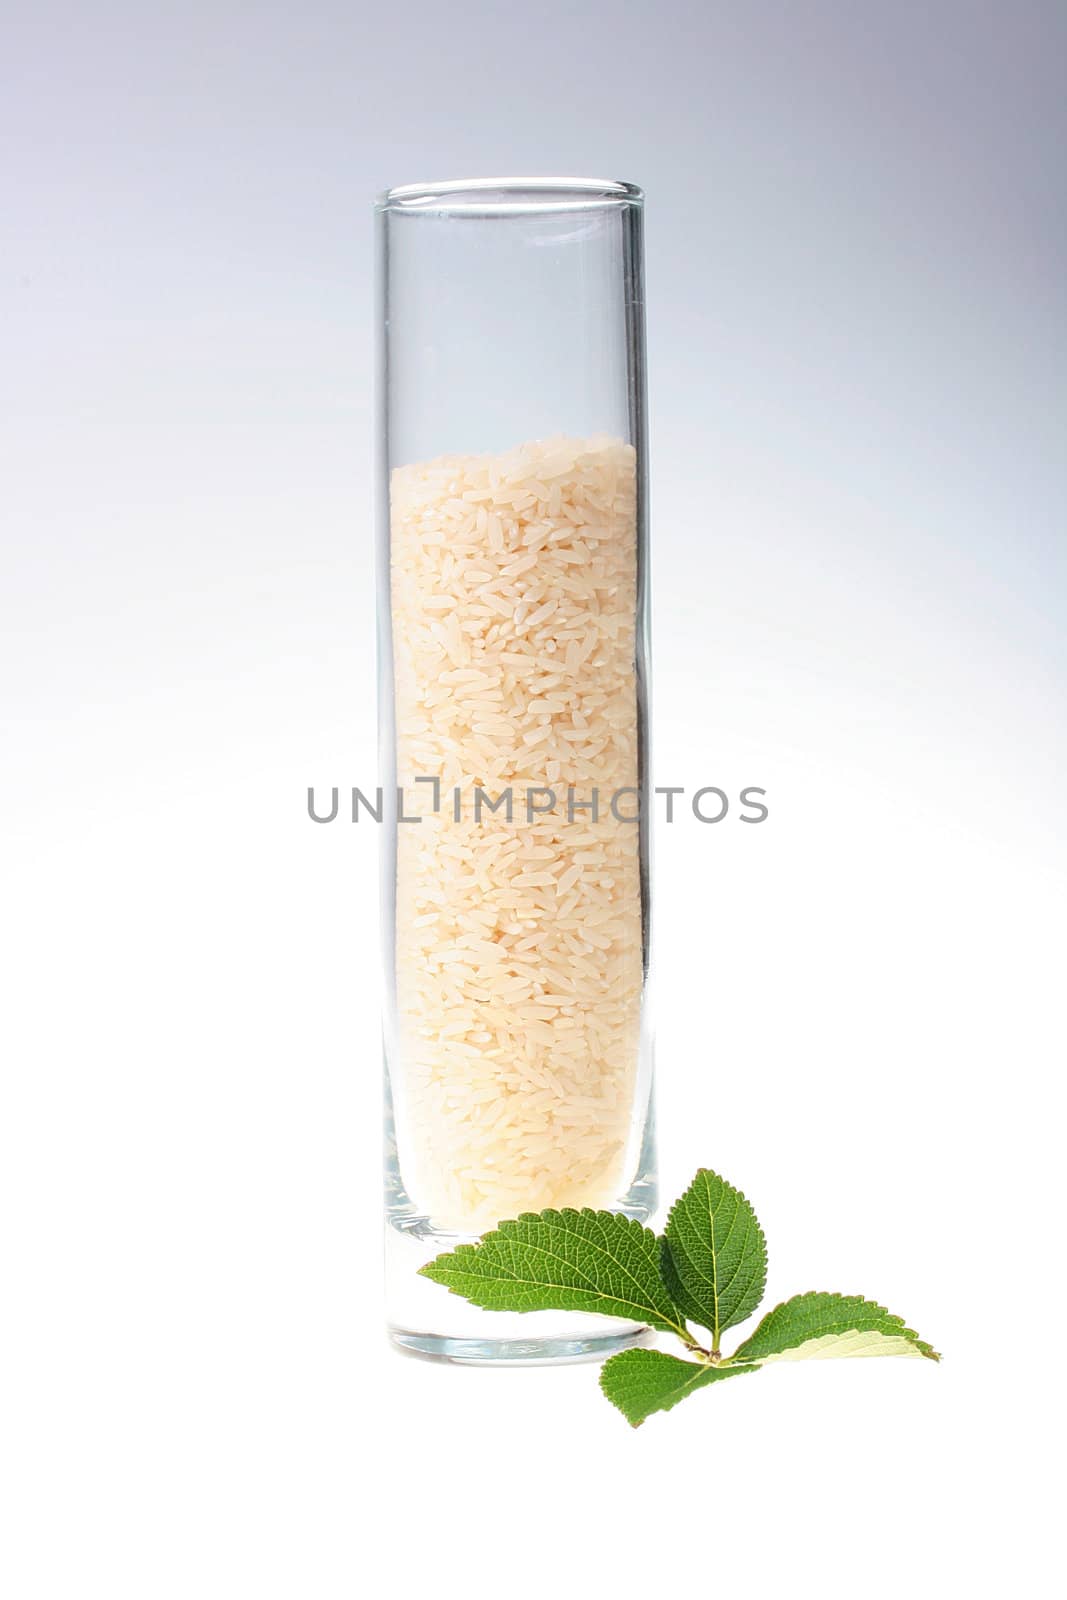 Rice grains in a high glass glass with a mint leaf.